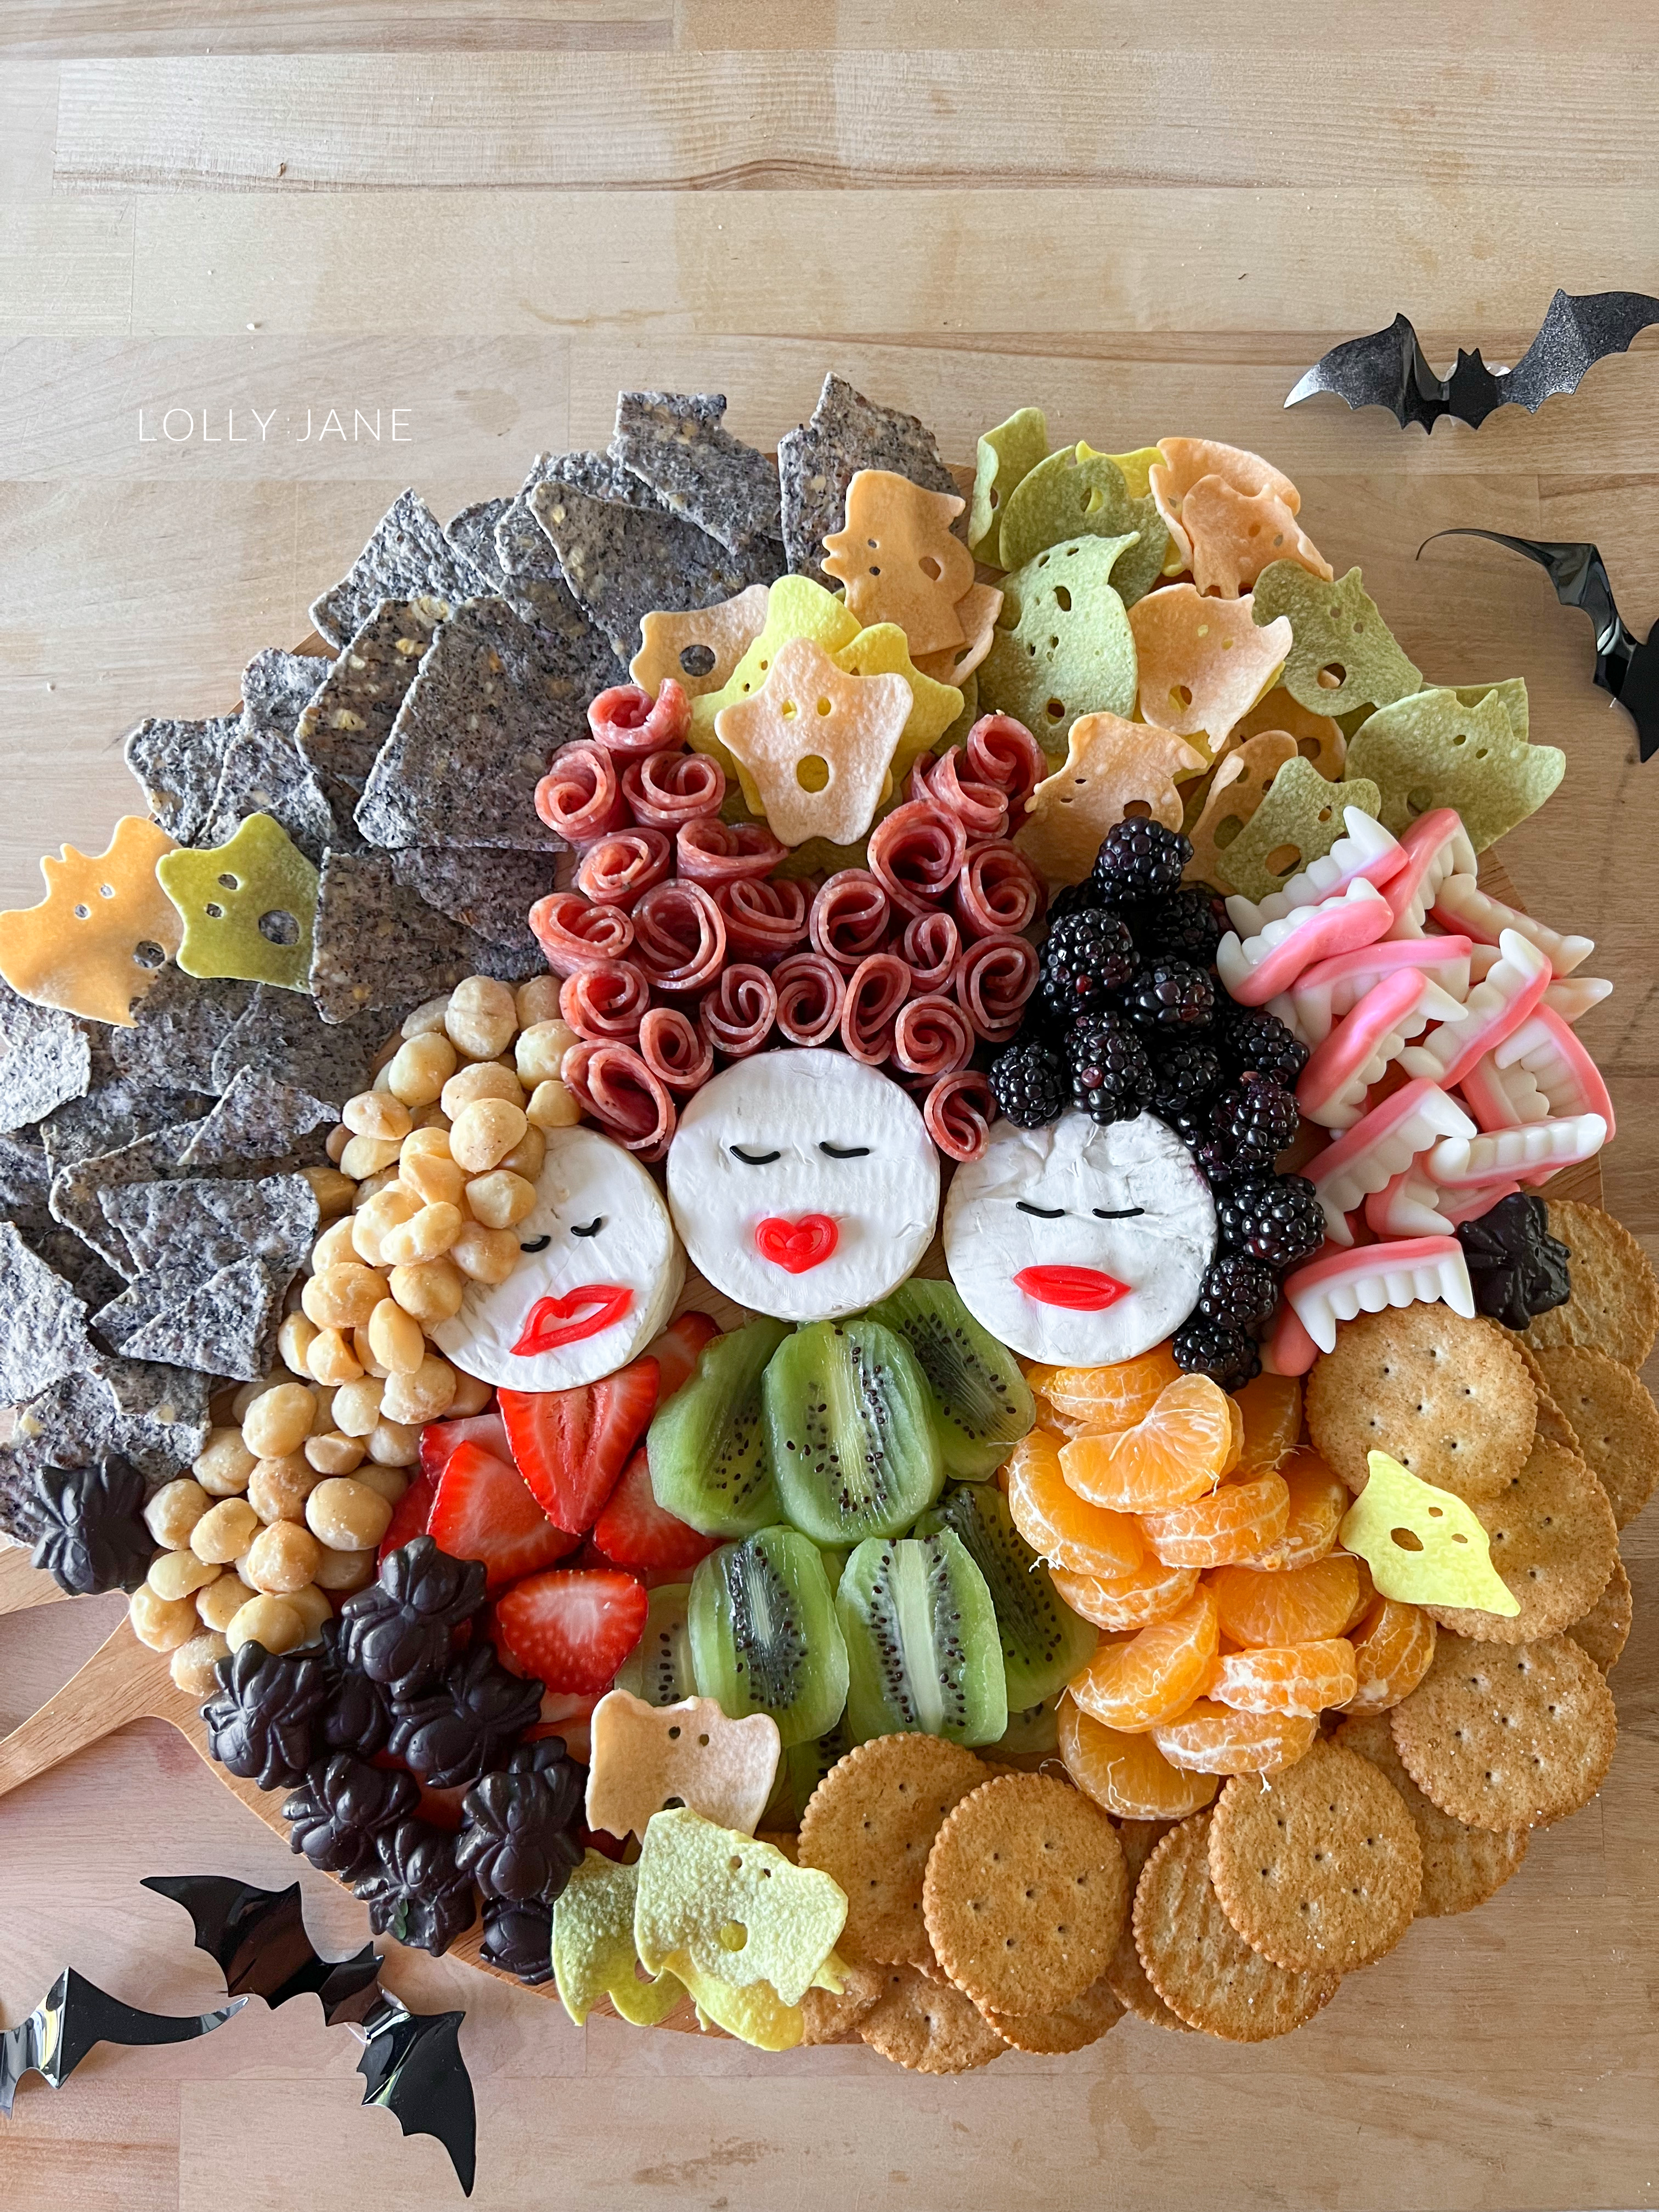 This fun Hocus Pocus themed charcuterie board is the perfect way to kick off the Halloween season! Fill it up with sweet and savory goodies, cute cheese wheel faces, fruits and ghost chips for a not so spooky treat!